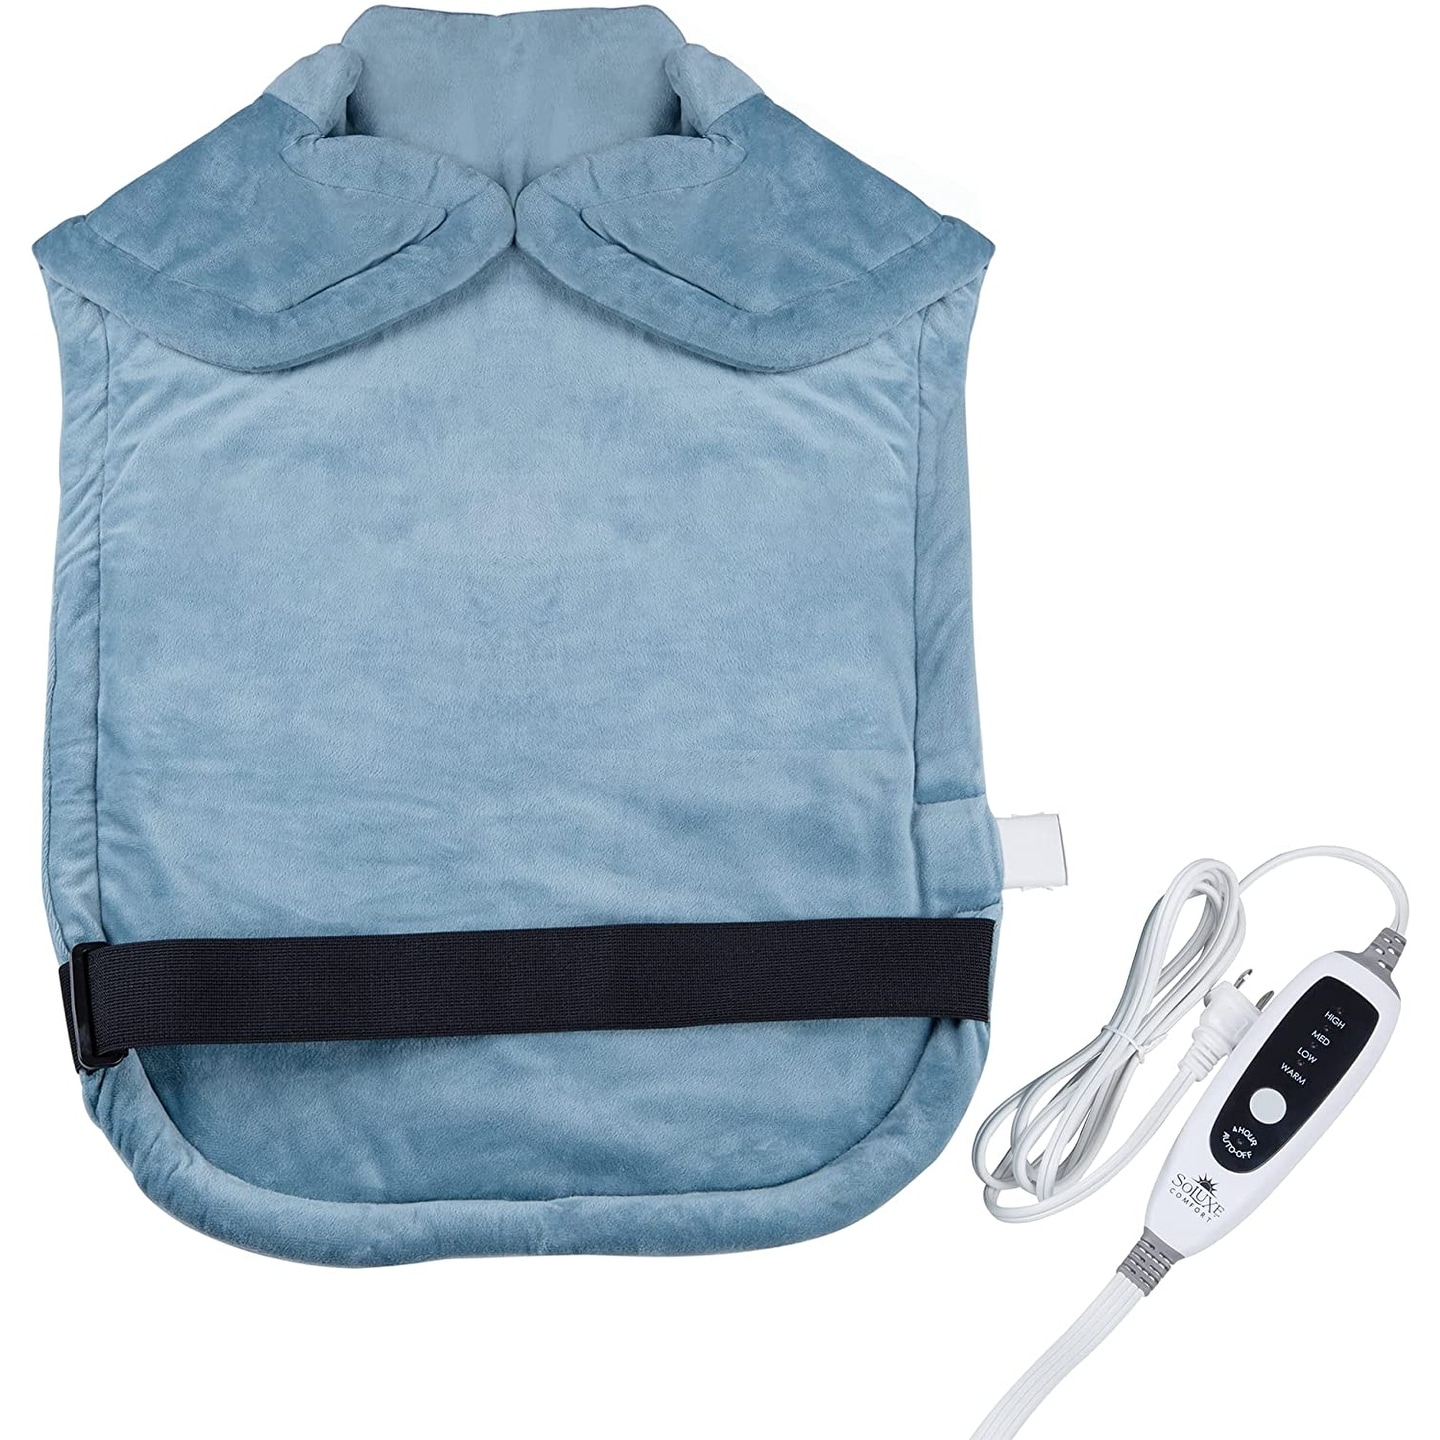 https://ak1.ostkcdn.com/images/products/is/images/direct/c3205c5f9e37d14b133f7b9d985c7dba00cbb22d/Soluxe-Comfort-Weighted-Heating-Pad-for-Neck-and-Back%2C-4-Heat-Settings-with-Auto-Shut-Off%2C-Digital-Controller.jpg